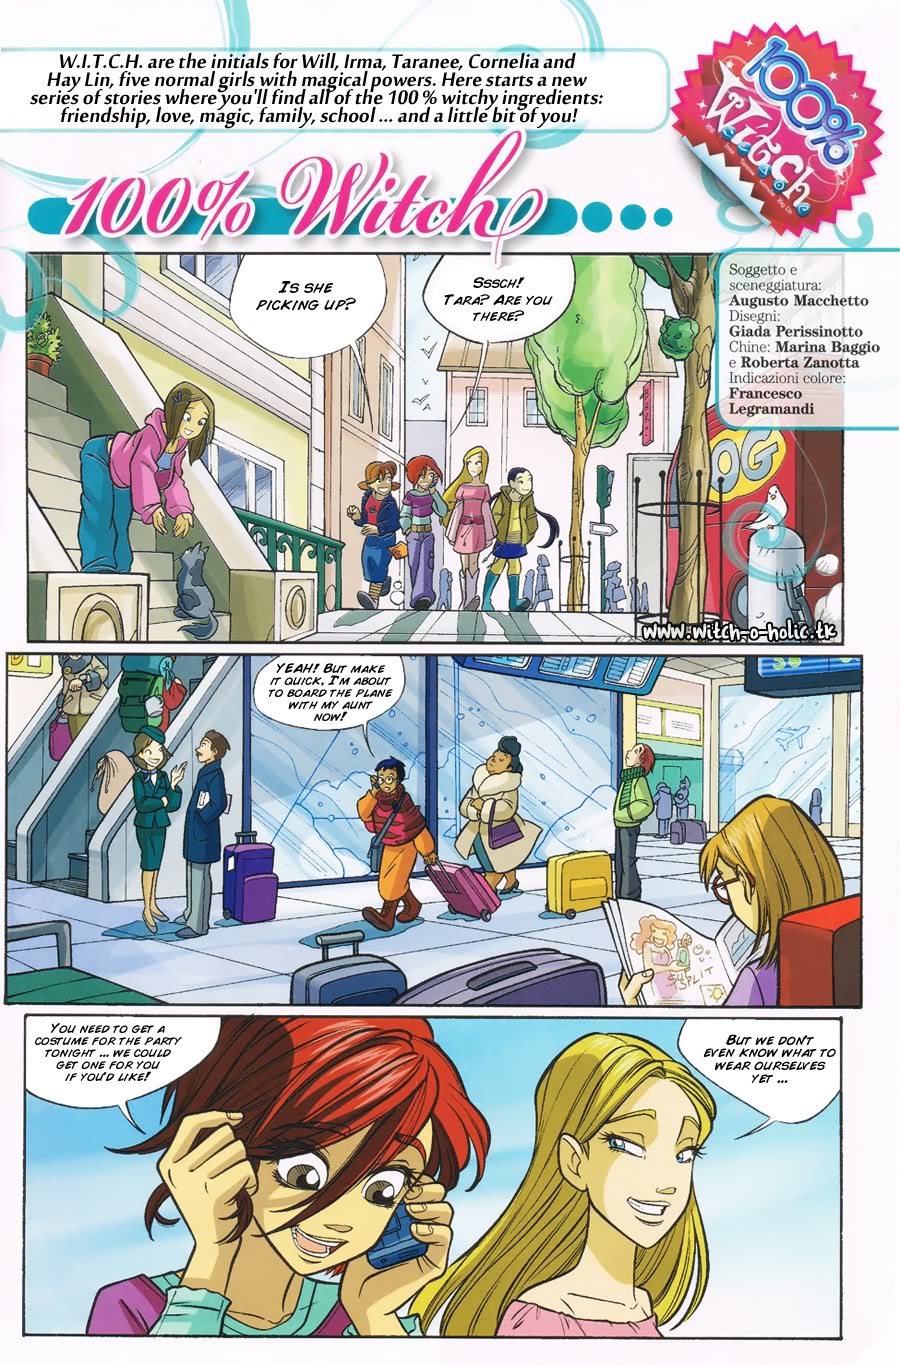 Read online W.i.t.c.h. comic -  Issue #100 - 1